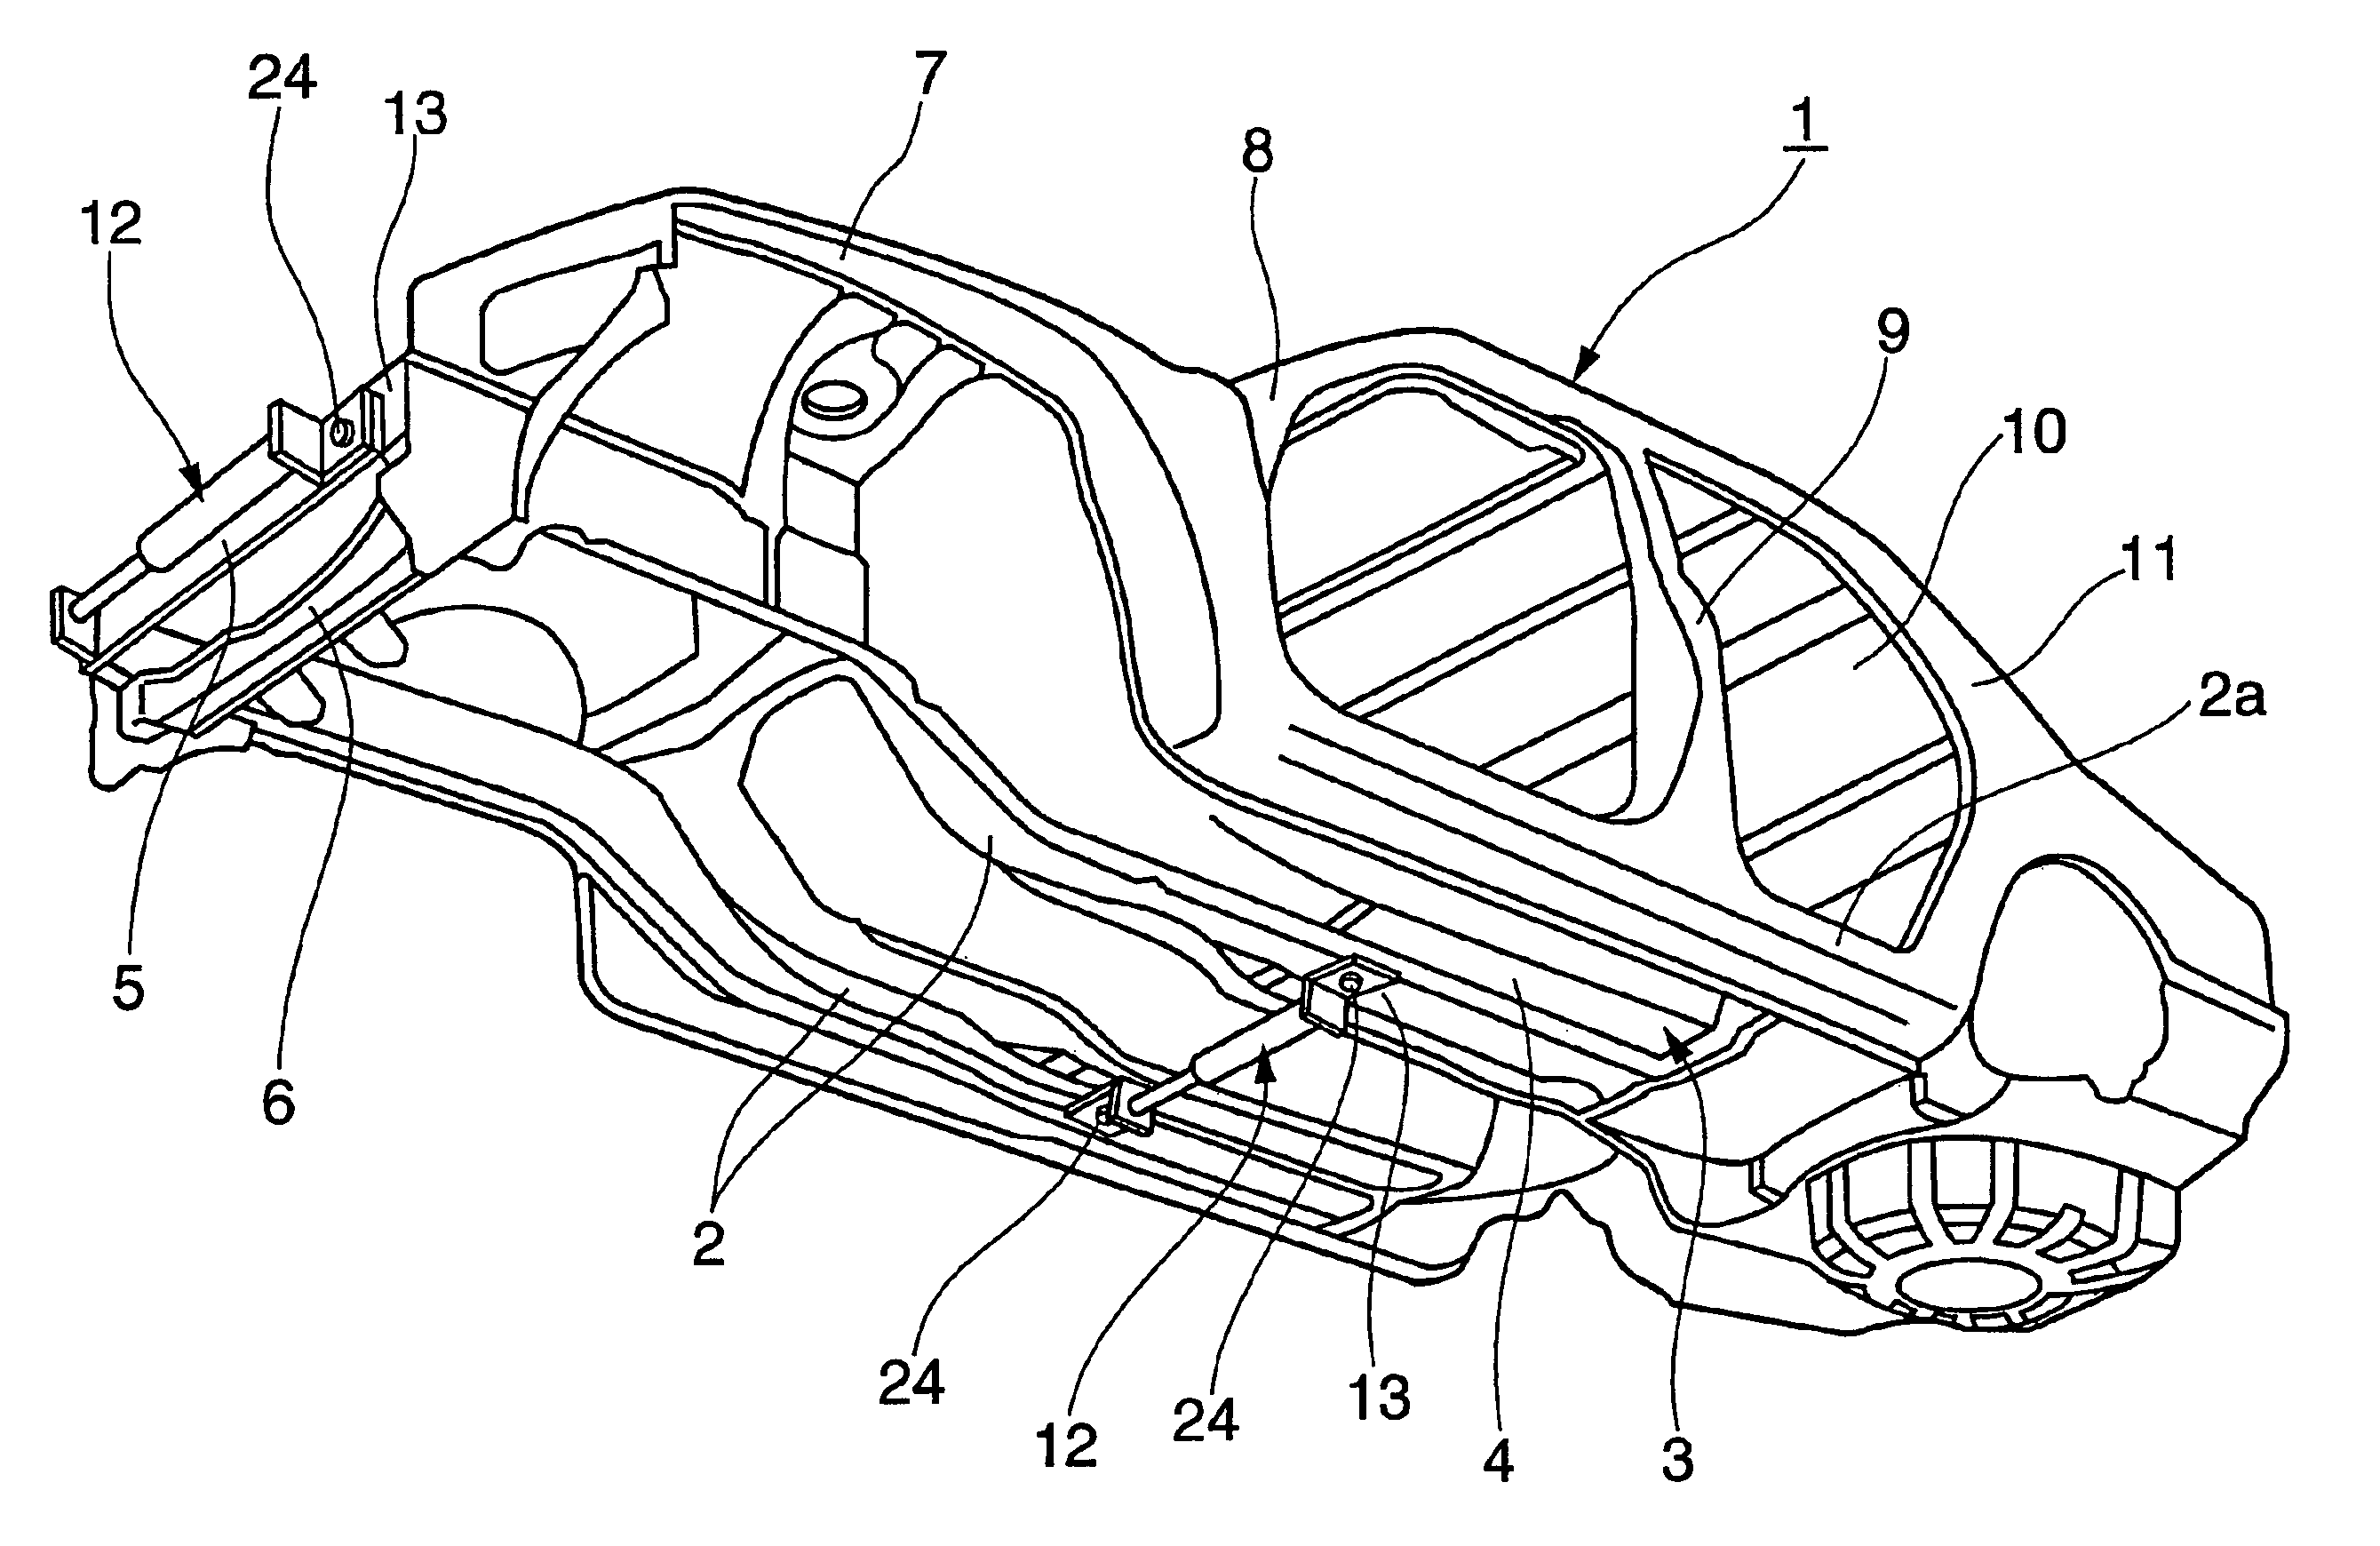 Reinforcement device for vehicle